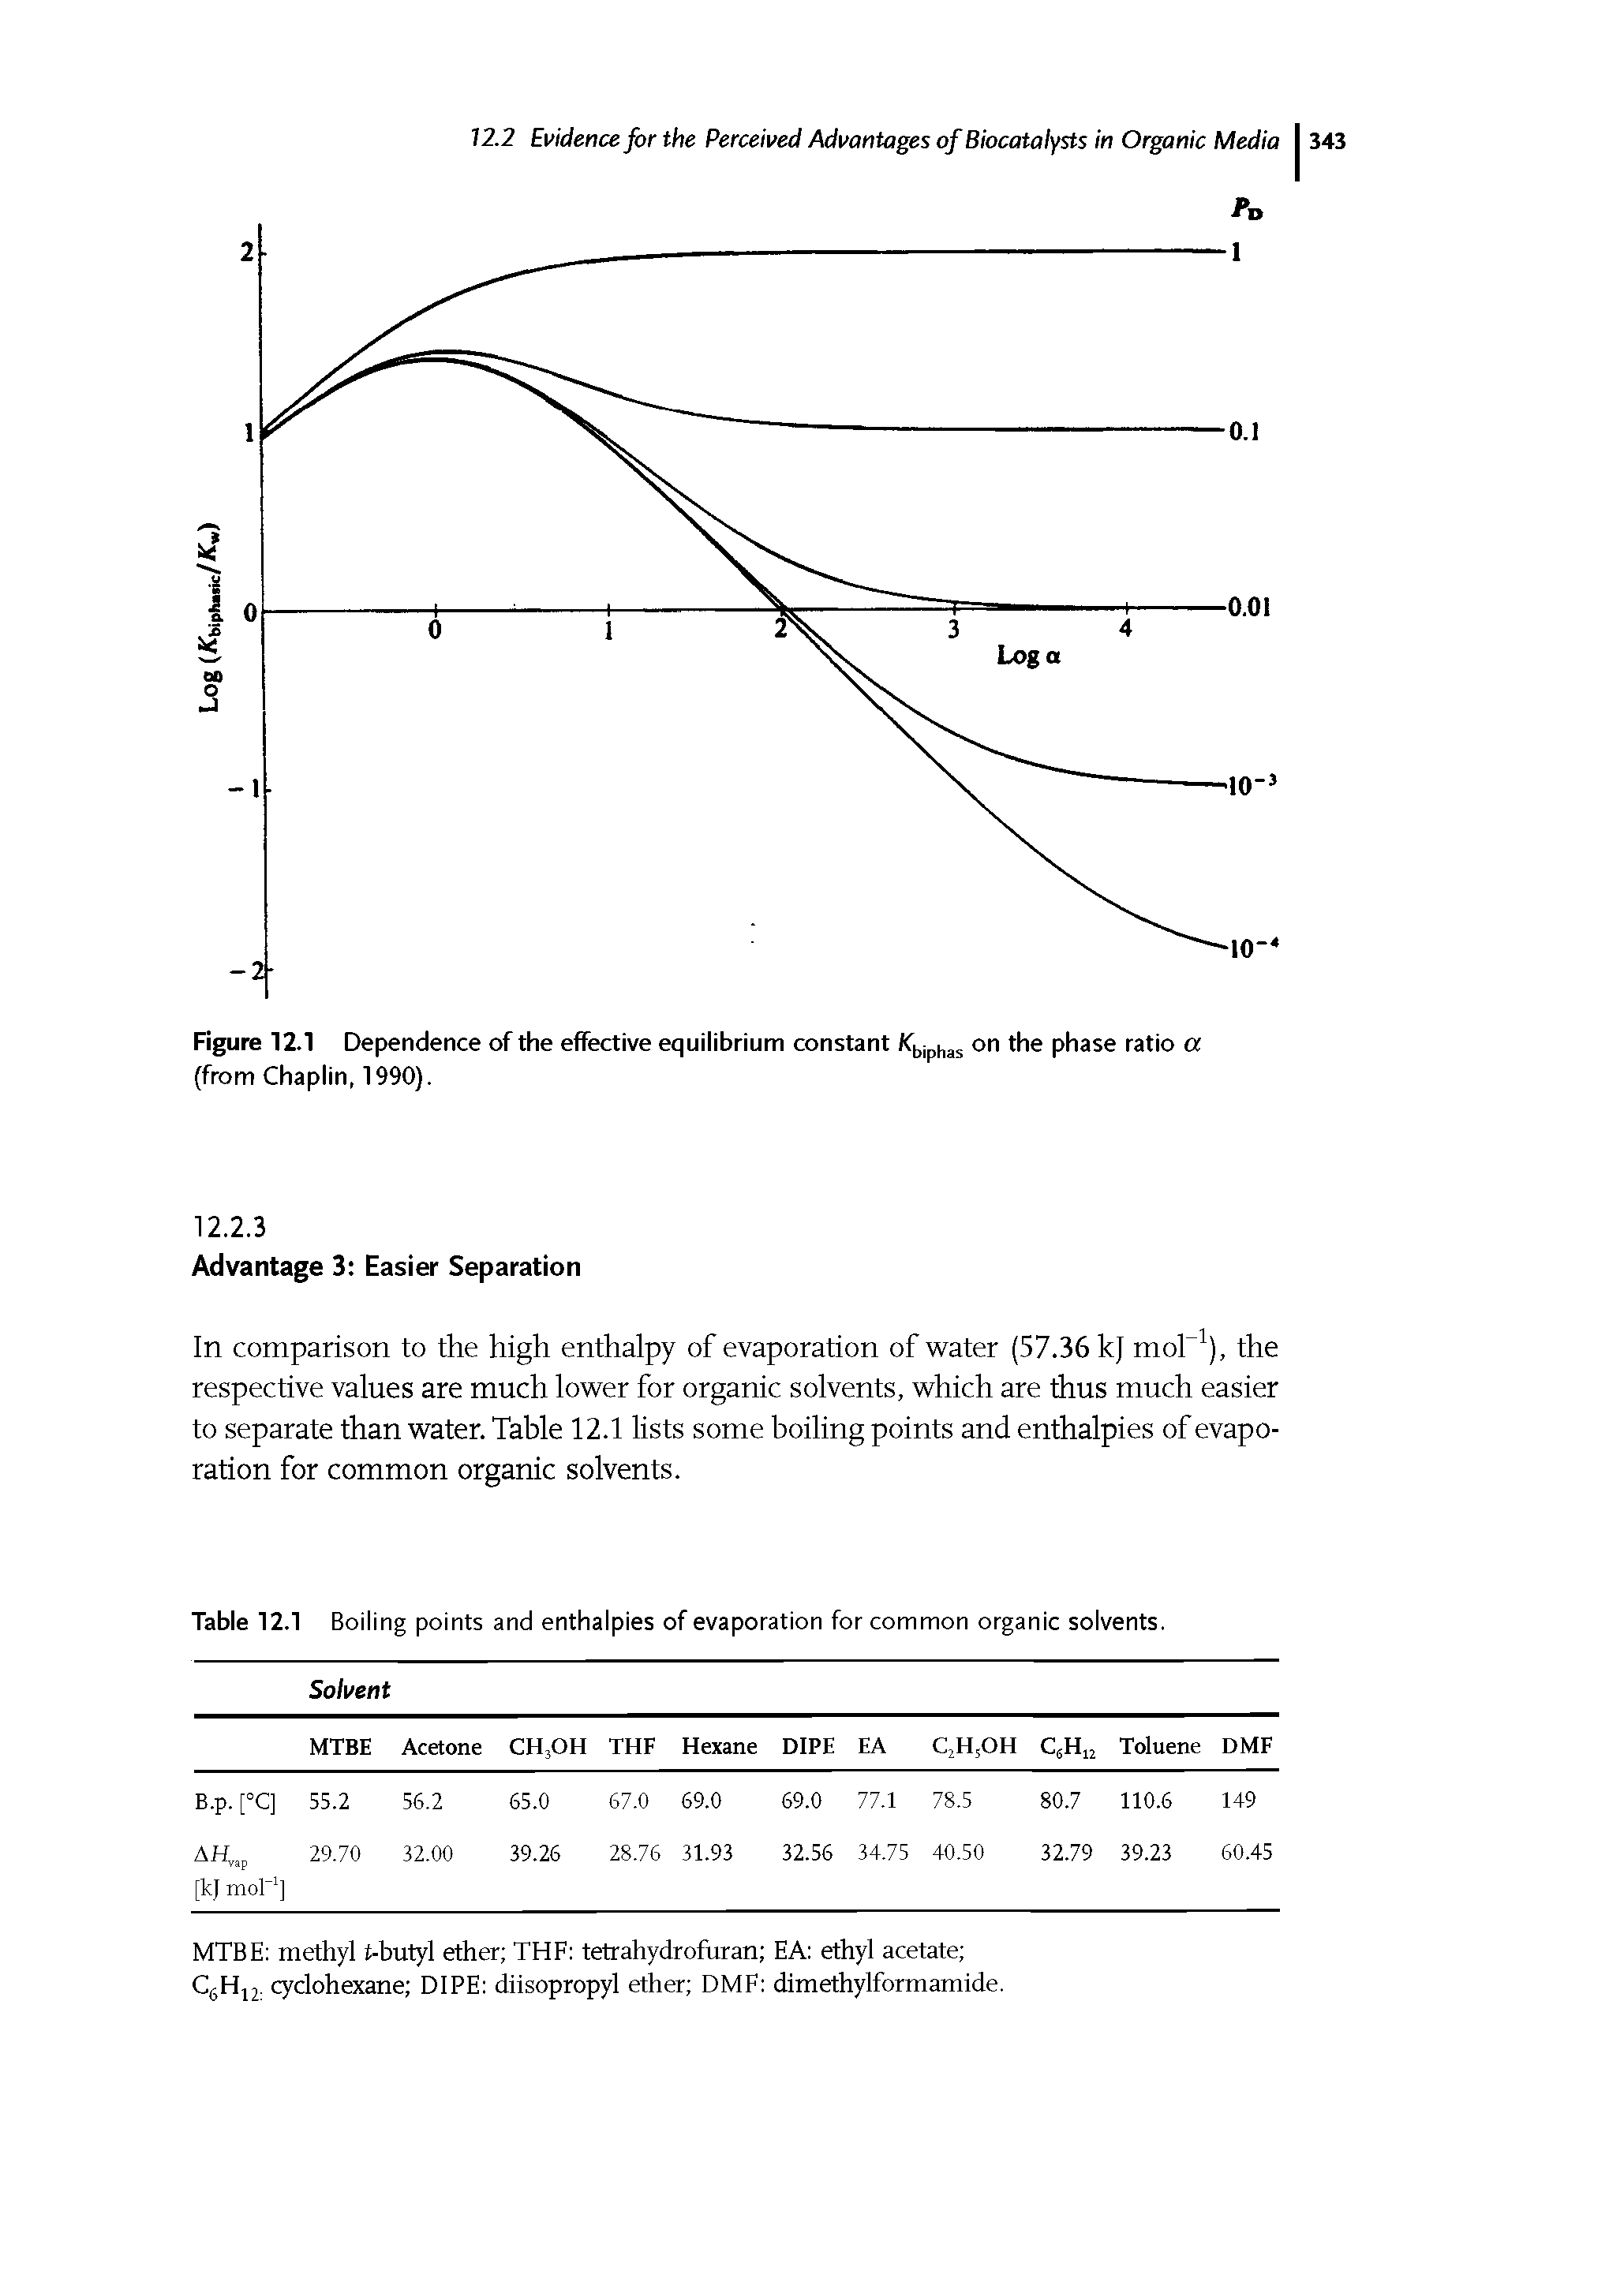 Figure 12.1 Dependence of the effective equilibrium constant 7fbiphas on the phase ratio a (from Chaplin, 1990).